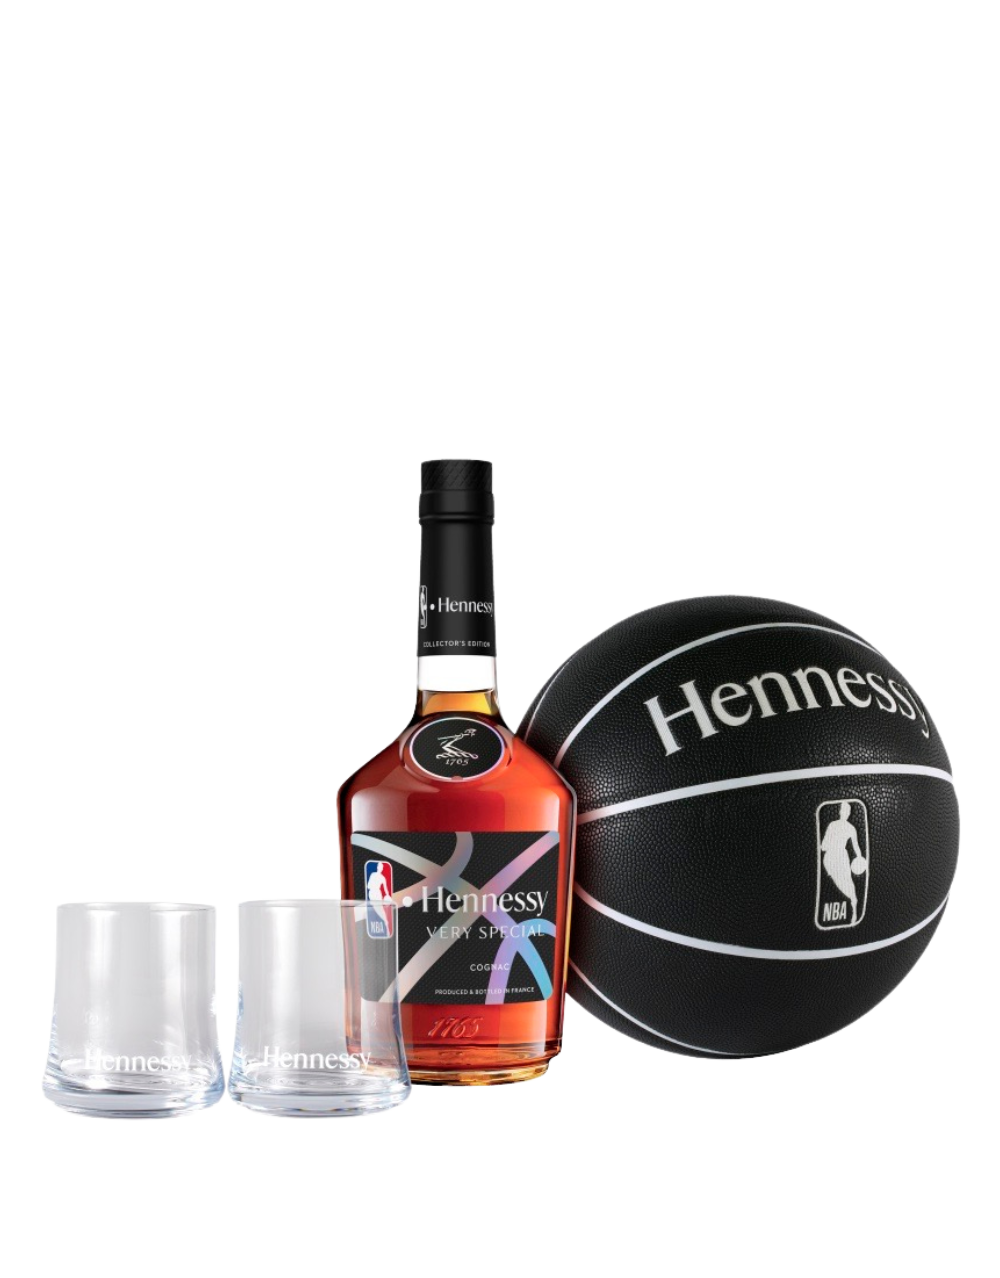 Hennessy Becomes The NBA's First Global Spirits Partner